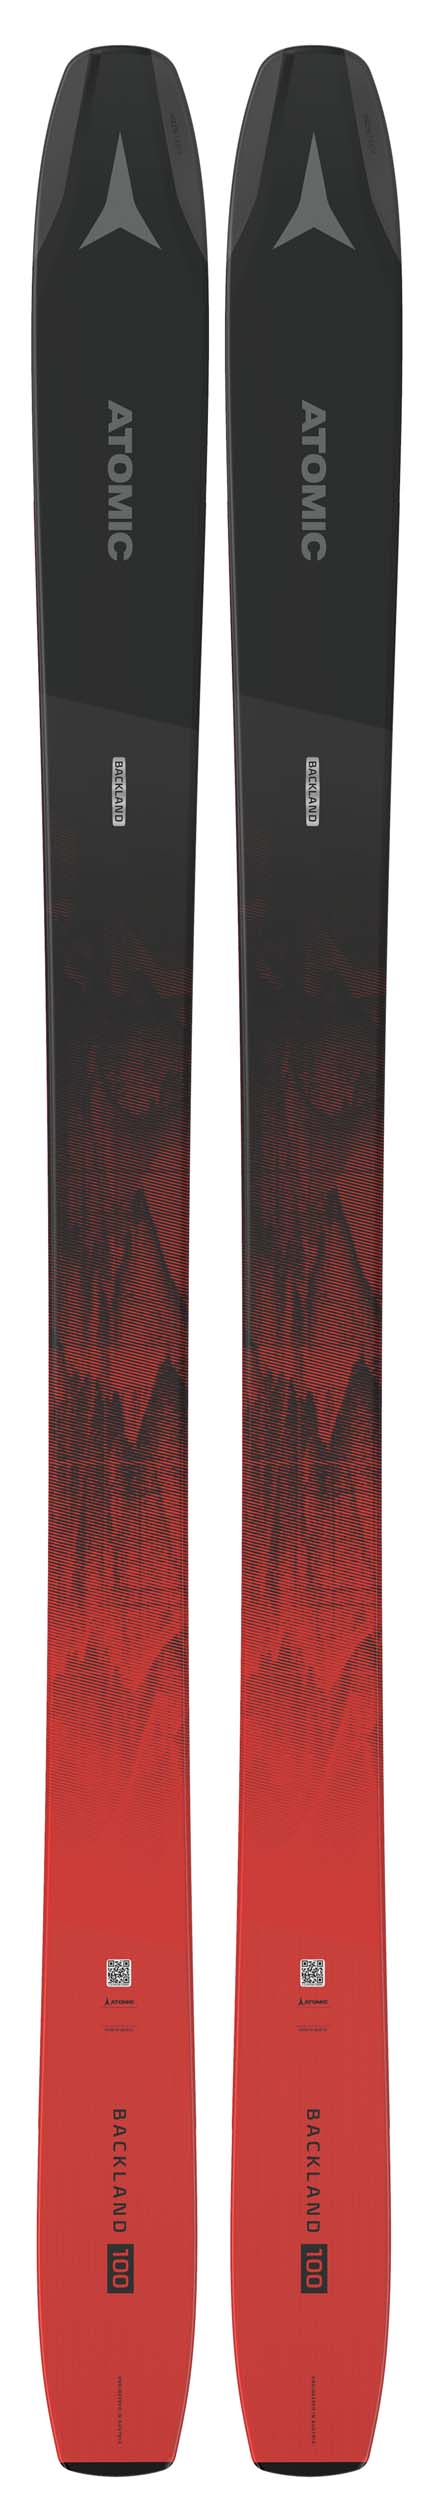 Atomic 2021 Backland 100 Skis (Without Bindings / Flat) NEW !! 172,180,188cm